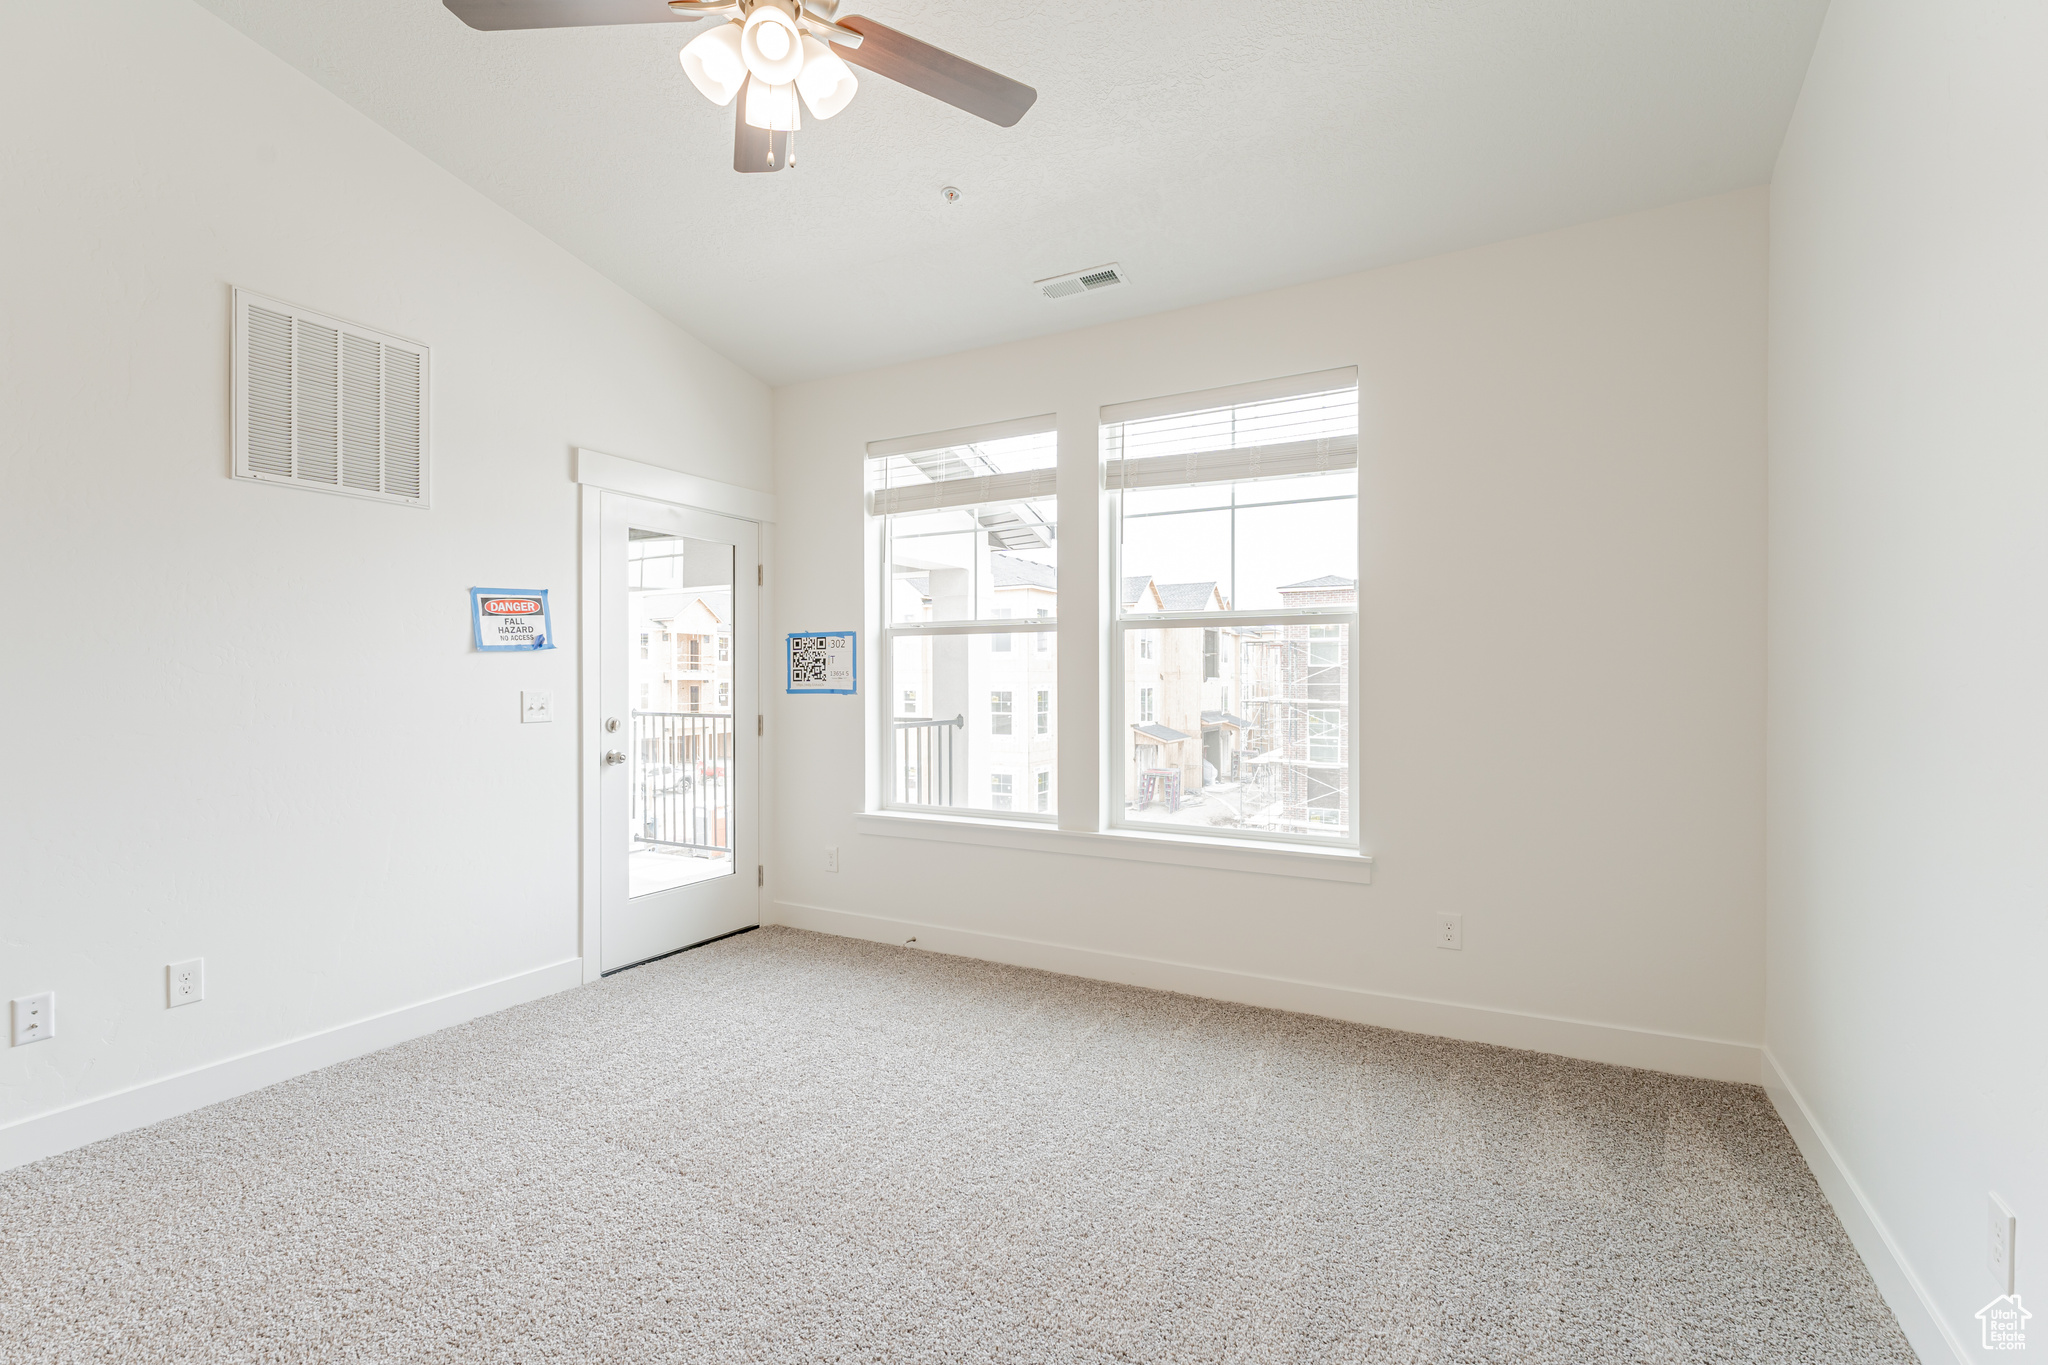 Spare room with ceiling fan, light colored carpet, and vaulted ceiling